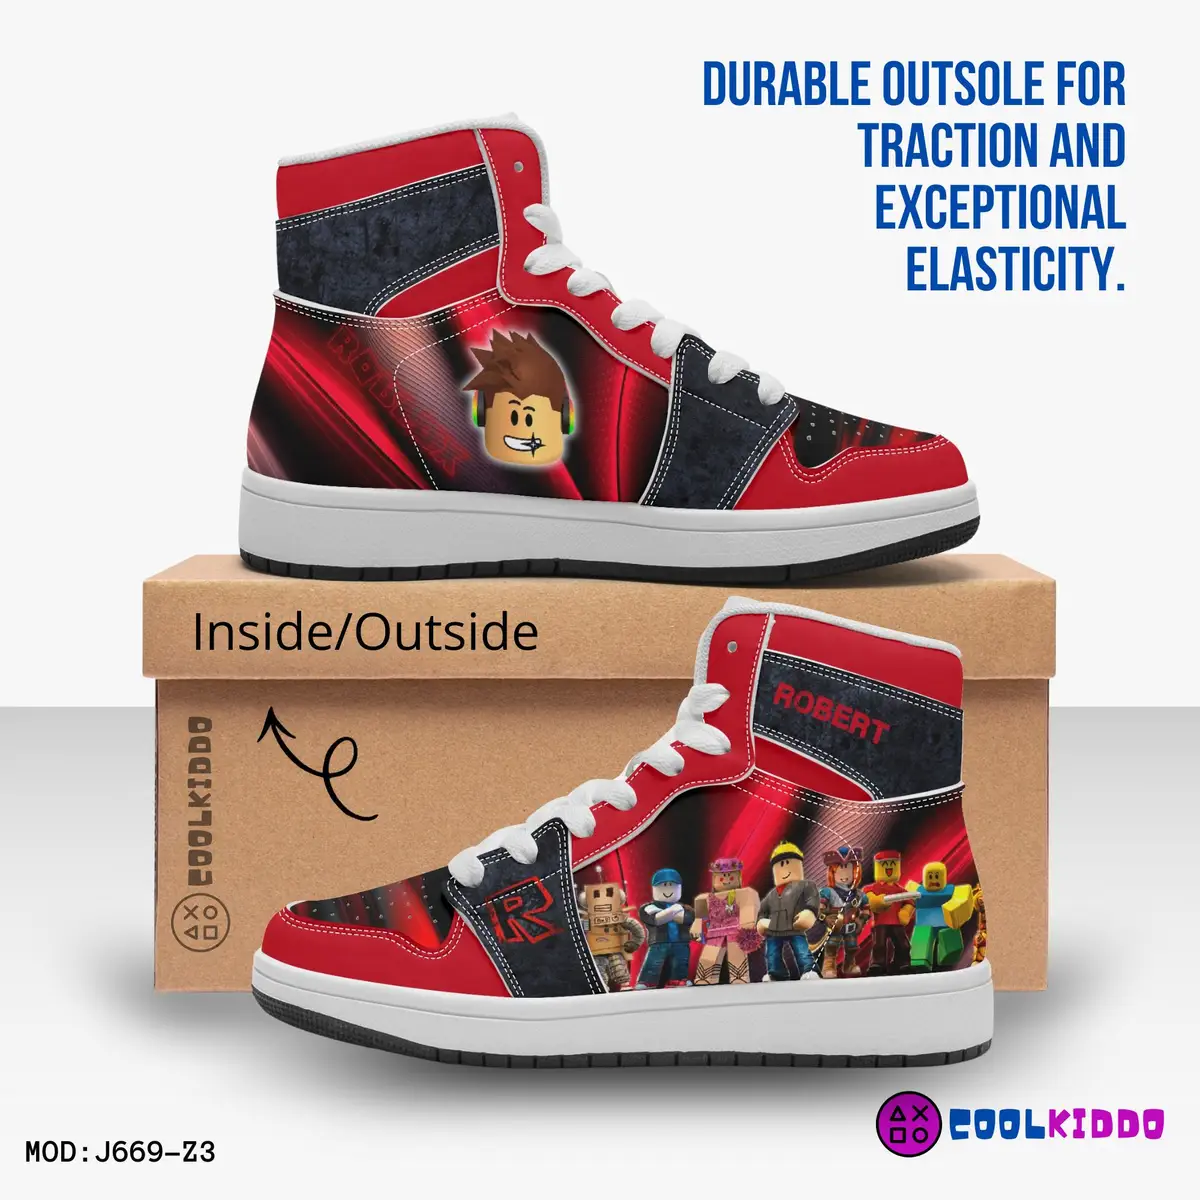 Personalized Name ROBLOX Characters High-Top Leather Black and Red Shoes, Jordans Style Sneakers Cool Kiddo 12